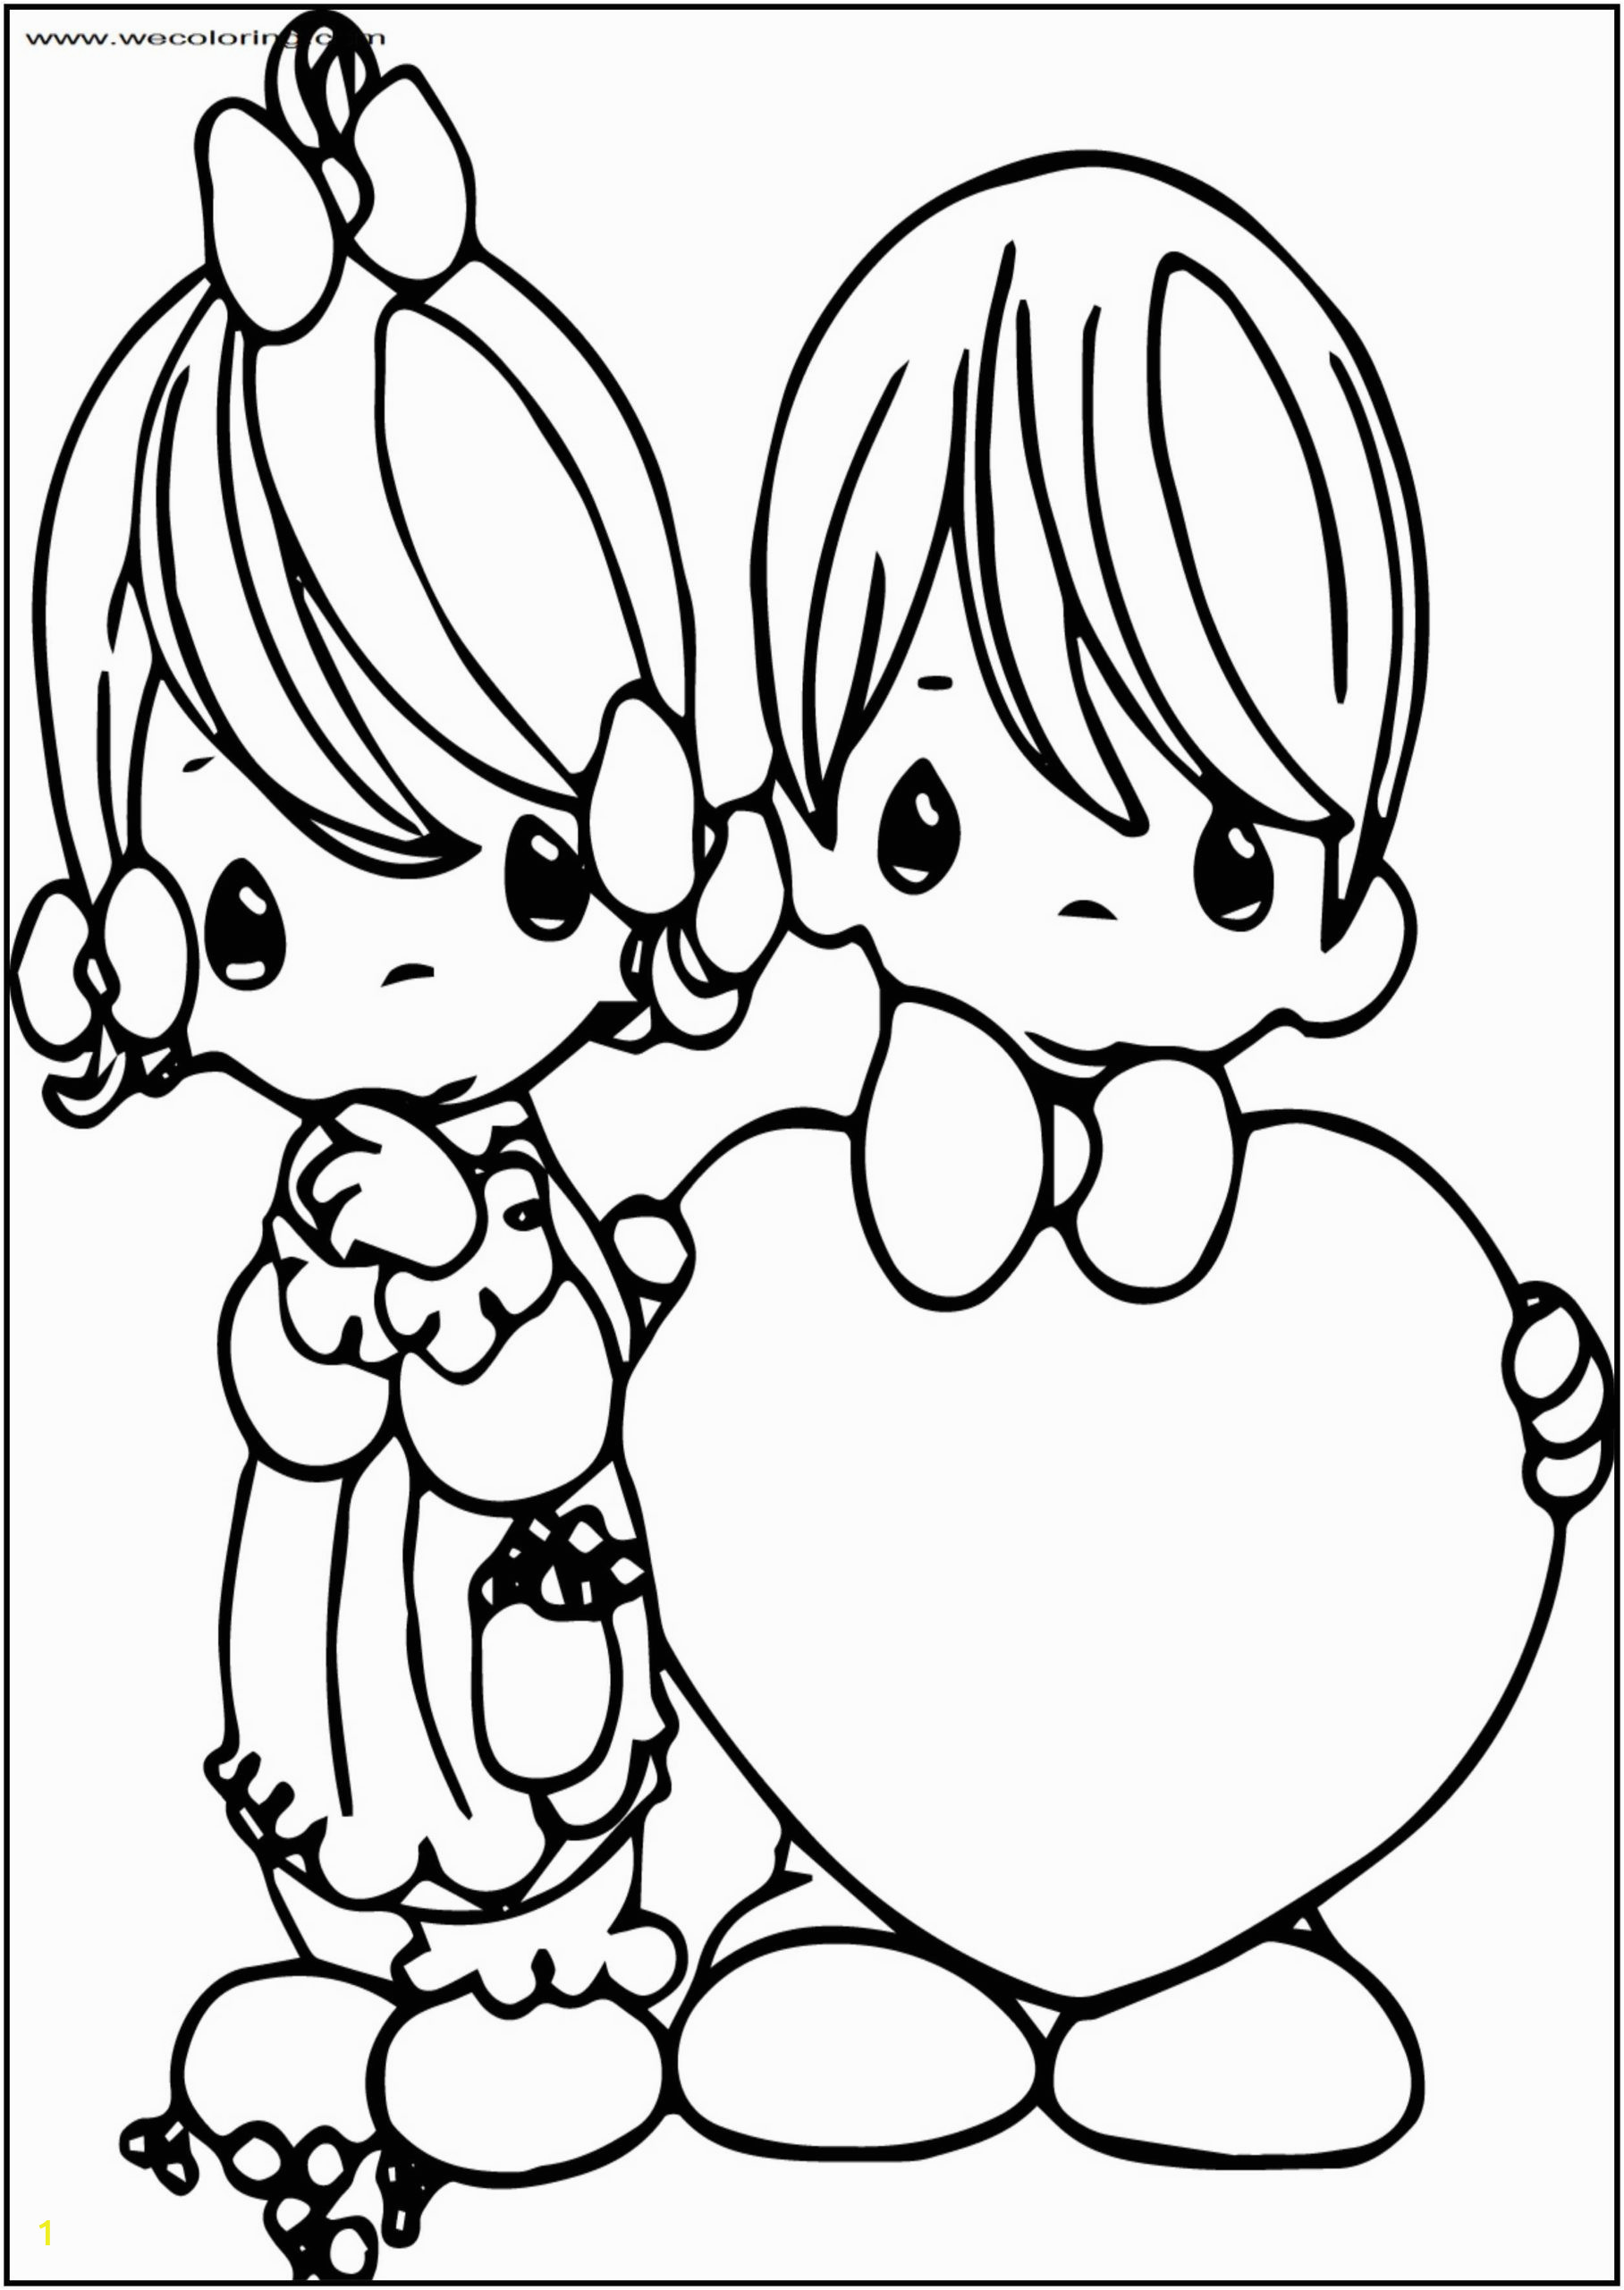 Handy Manny Coloring Pages top 50 Outstanding Precious Moments Coloring Page Free